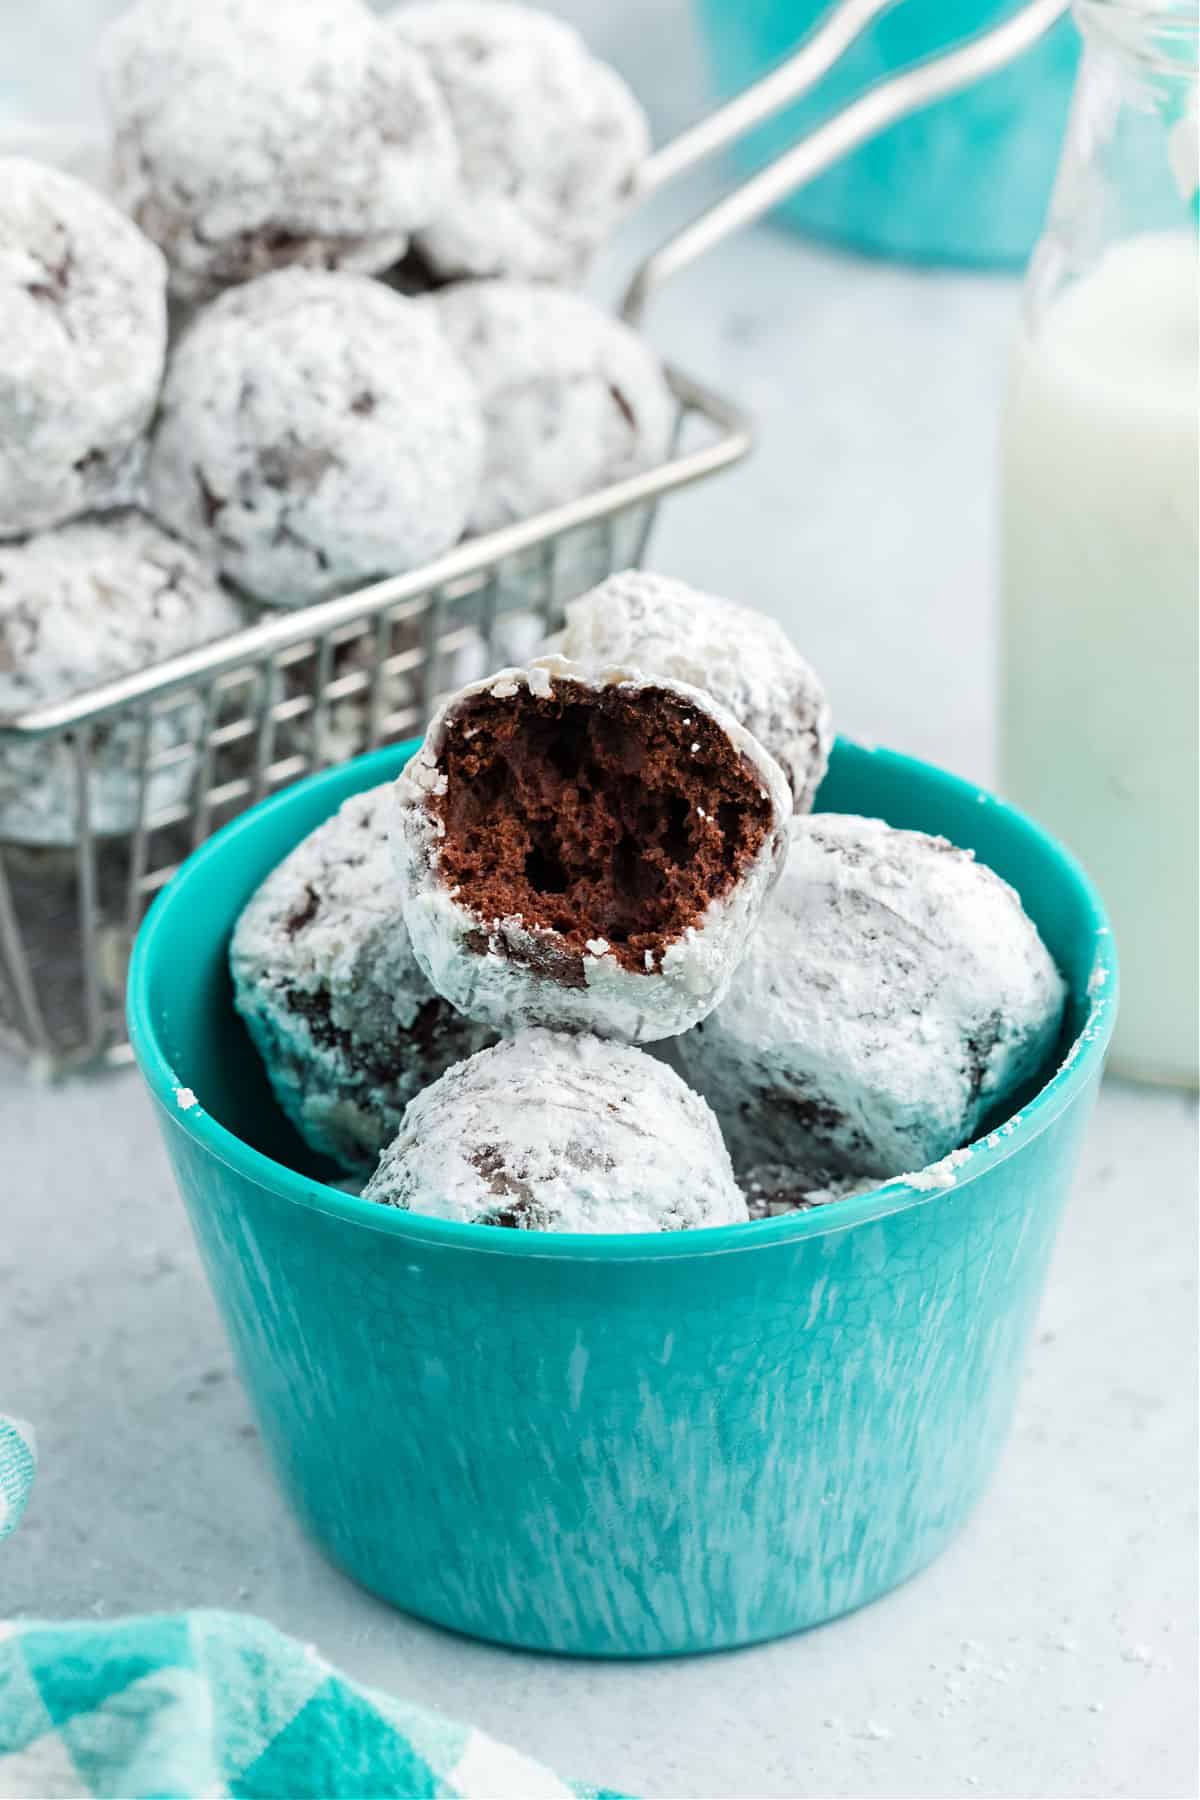 Chocolate powdered sugar donut holes in a teal bowl.